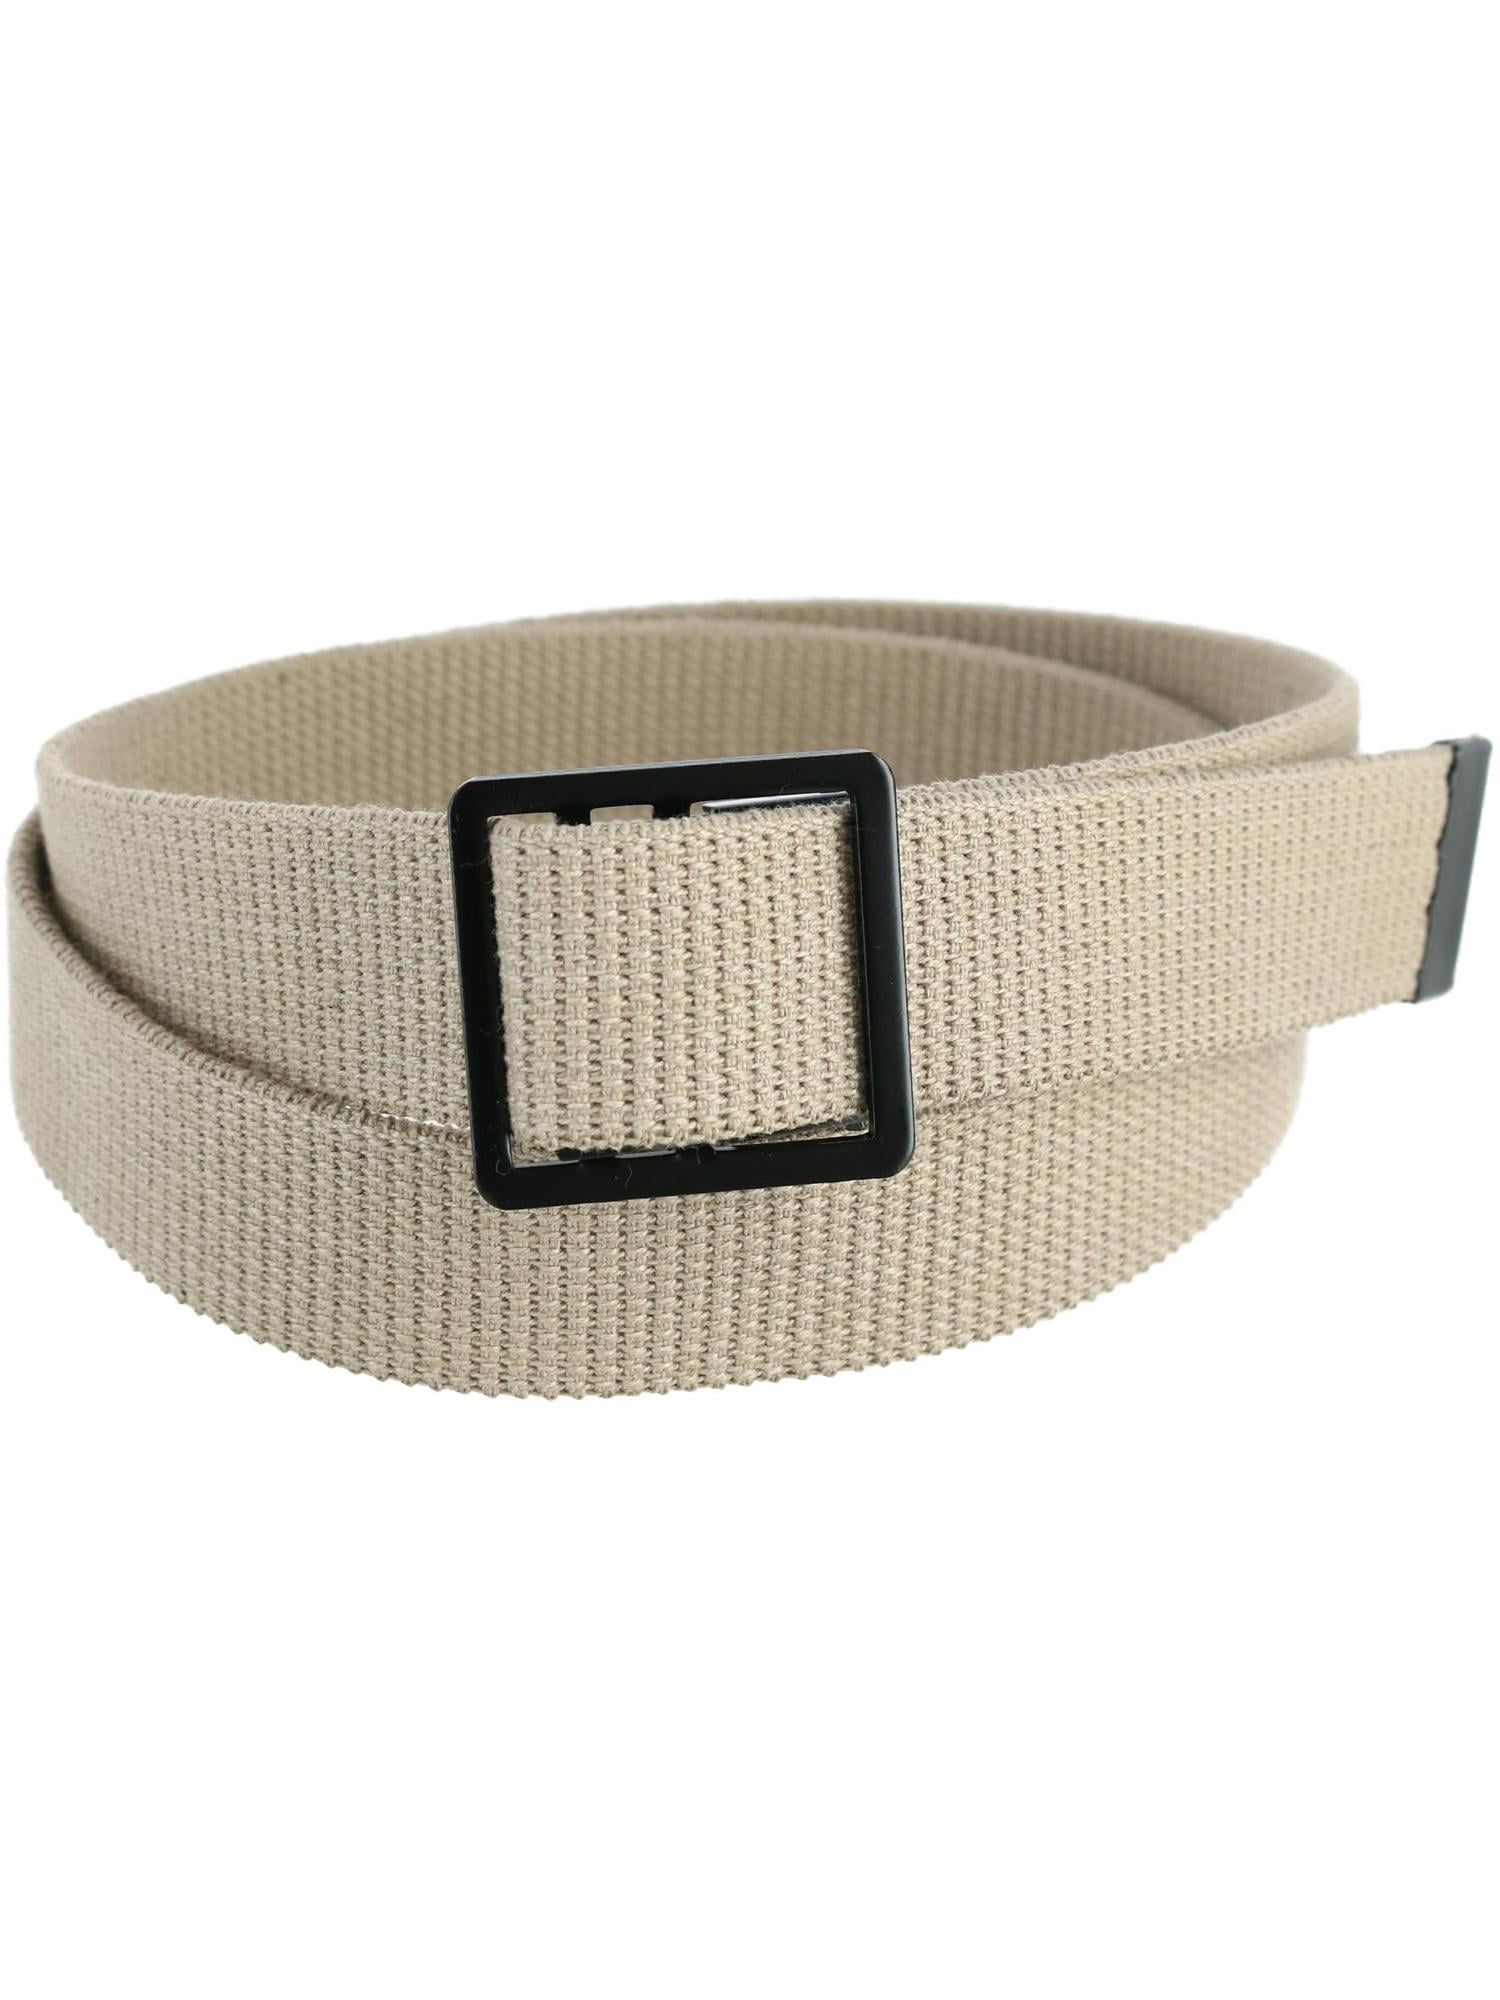 CTM Military Grade Belt with Open Face Buckle (Men Big & Tall ...